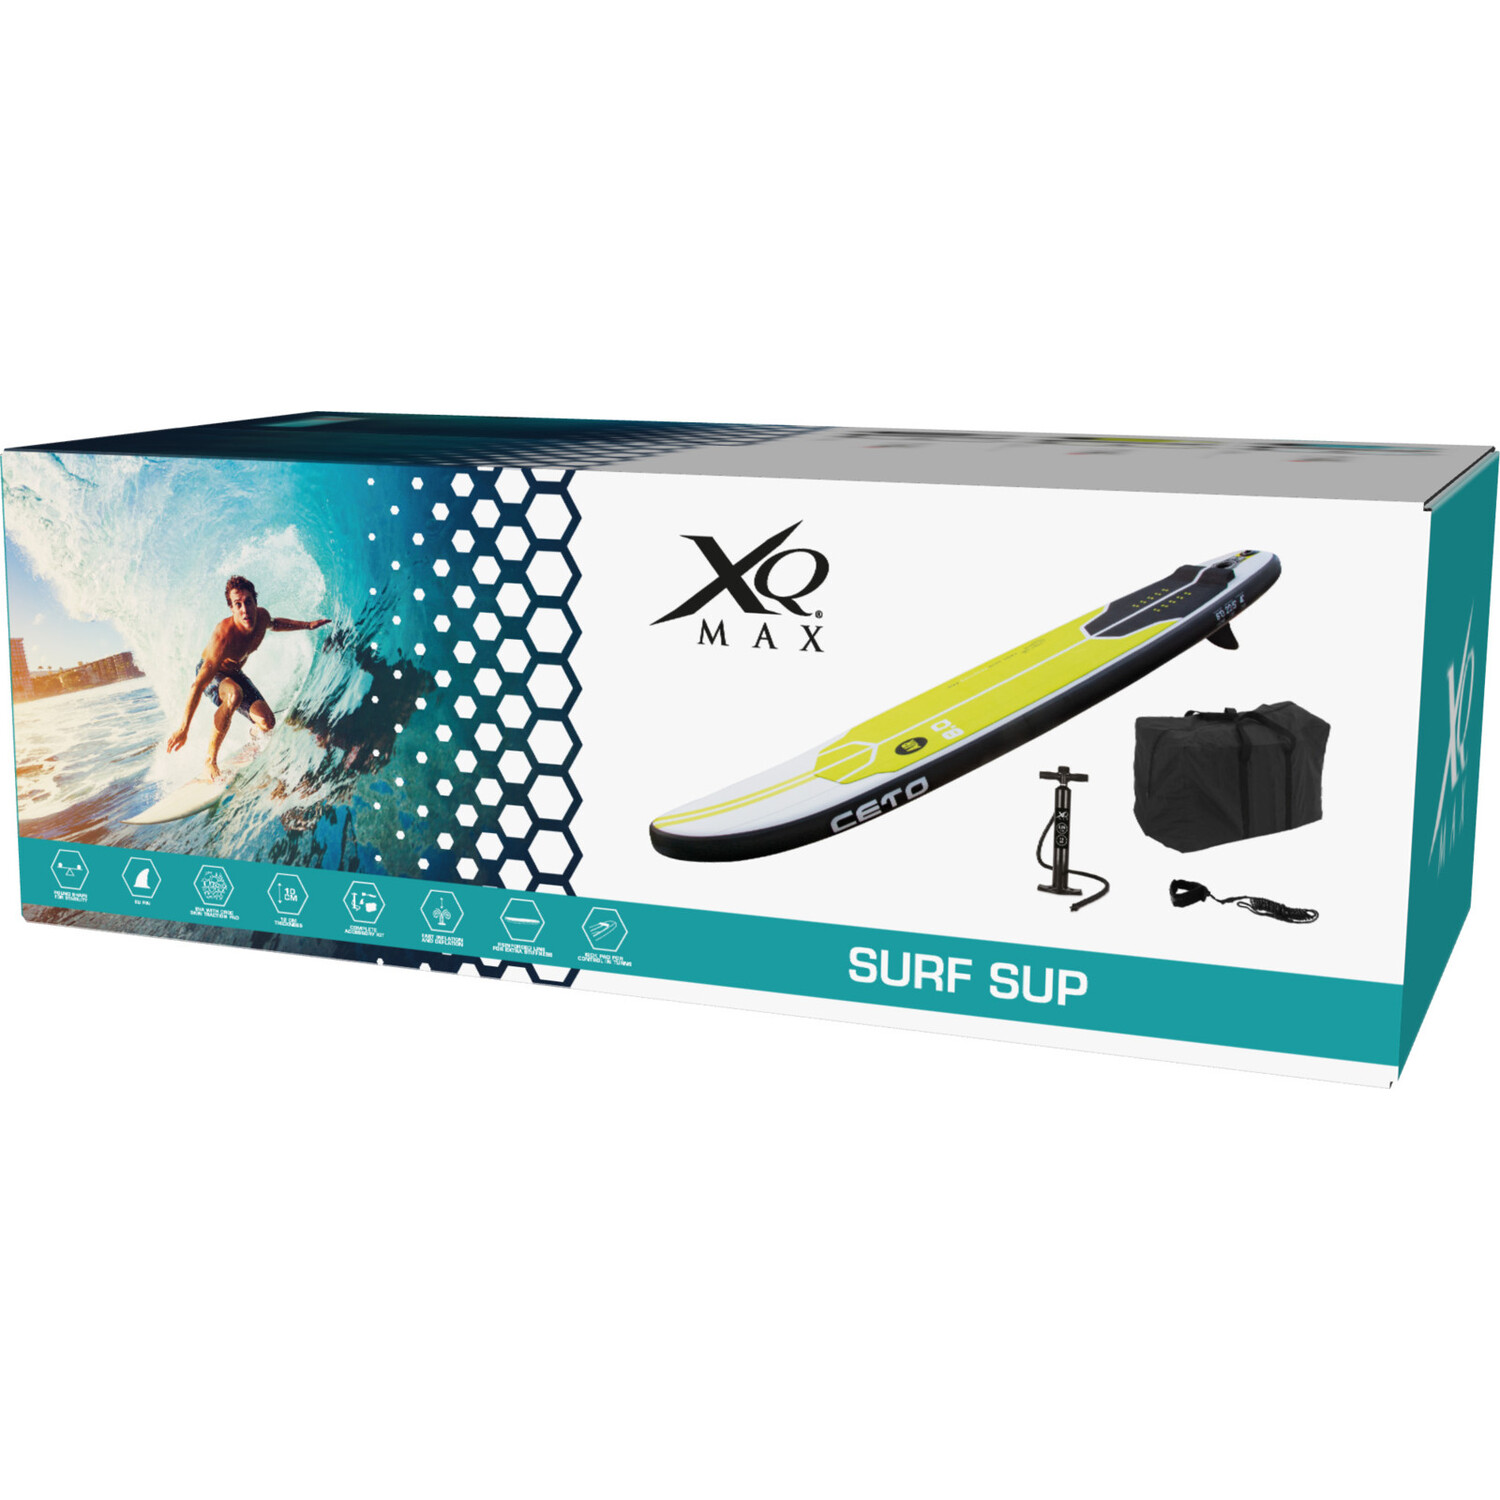 XQMAX 245 Surf Paddle Board - Blue Image 3